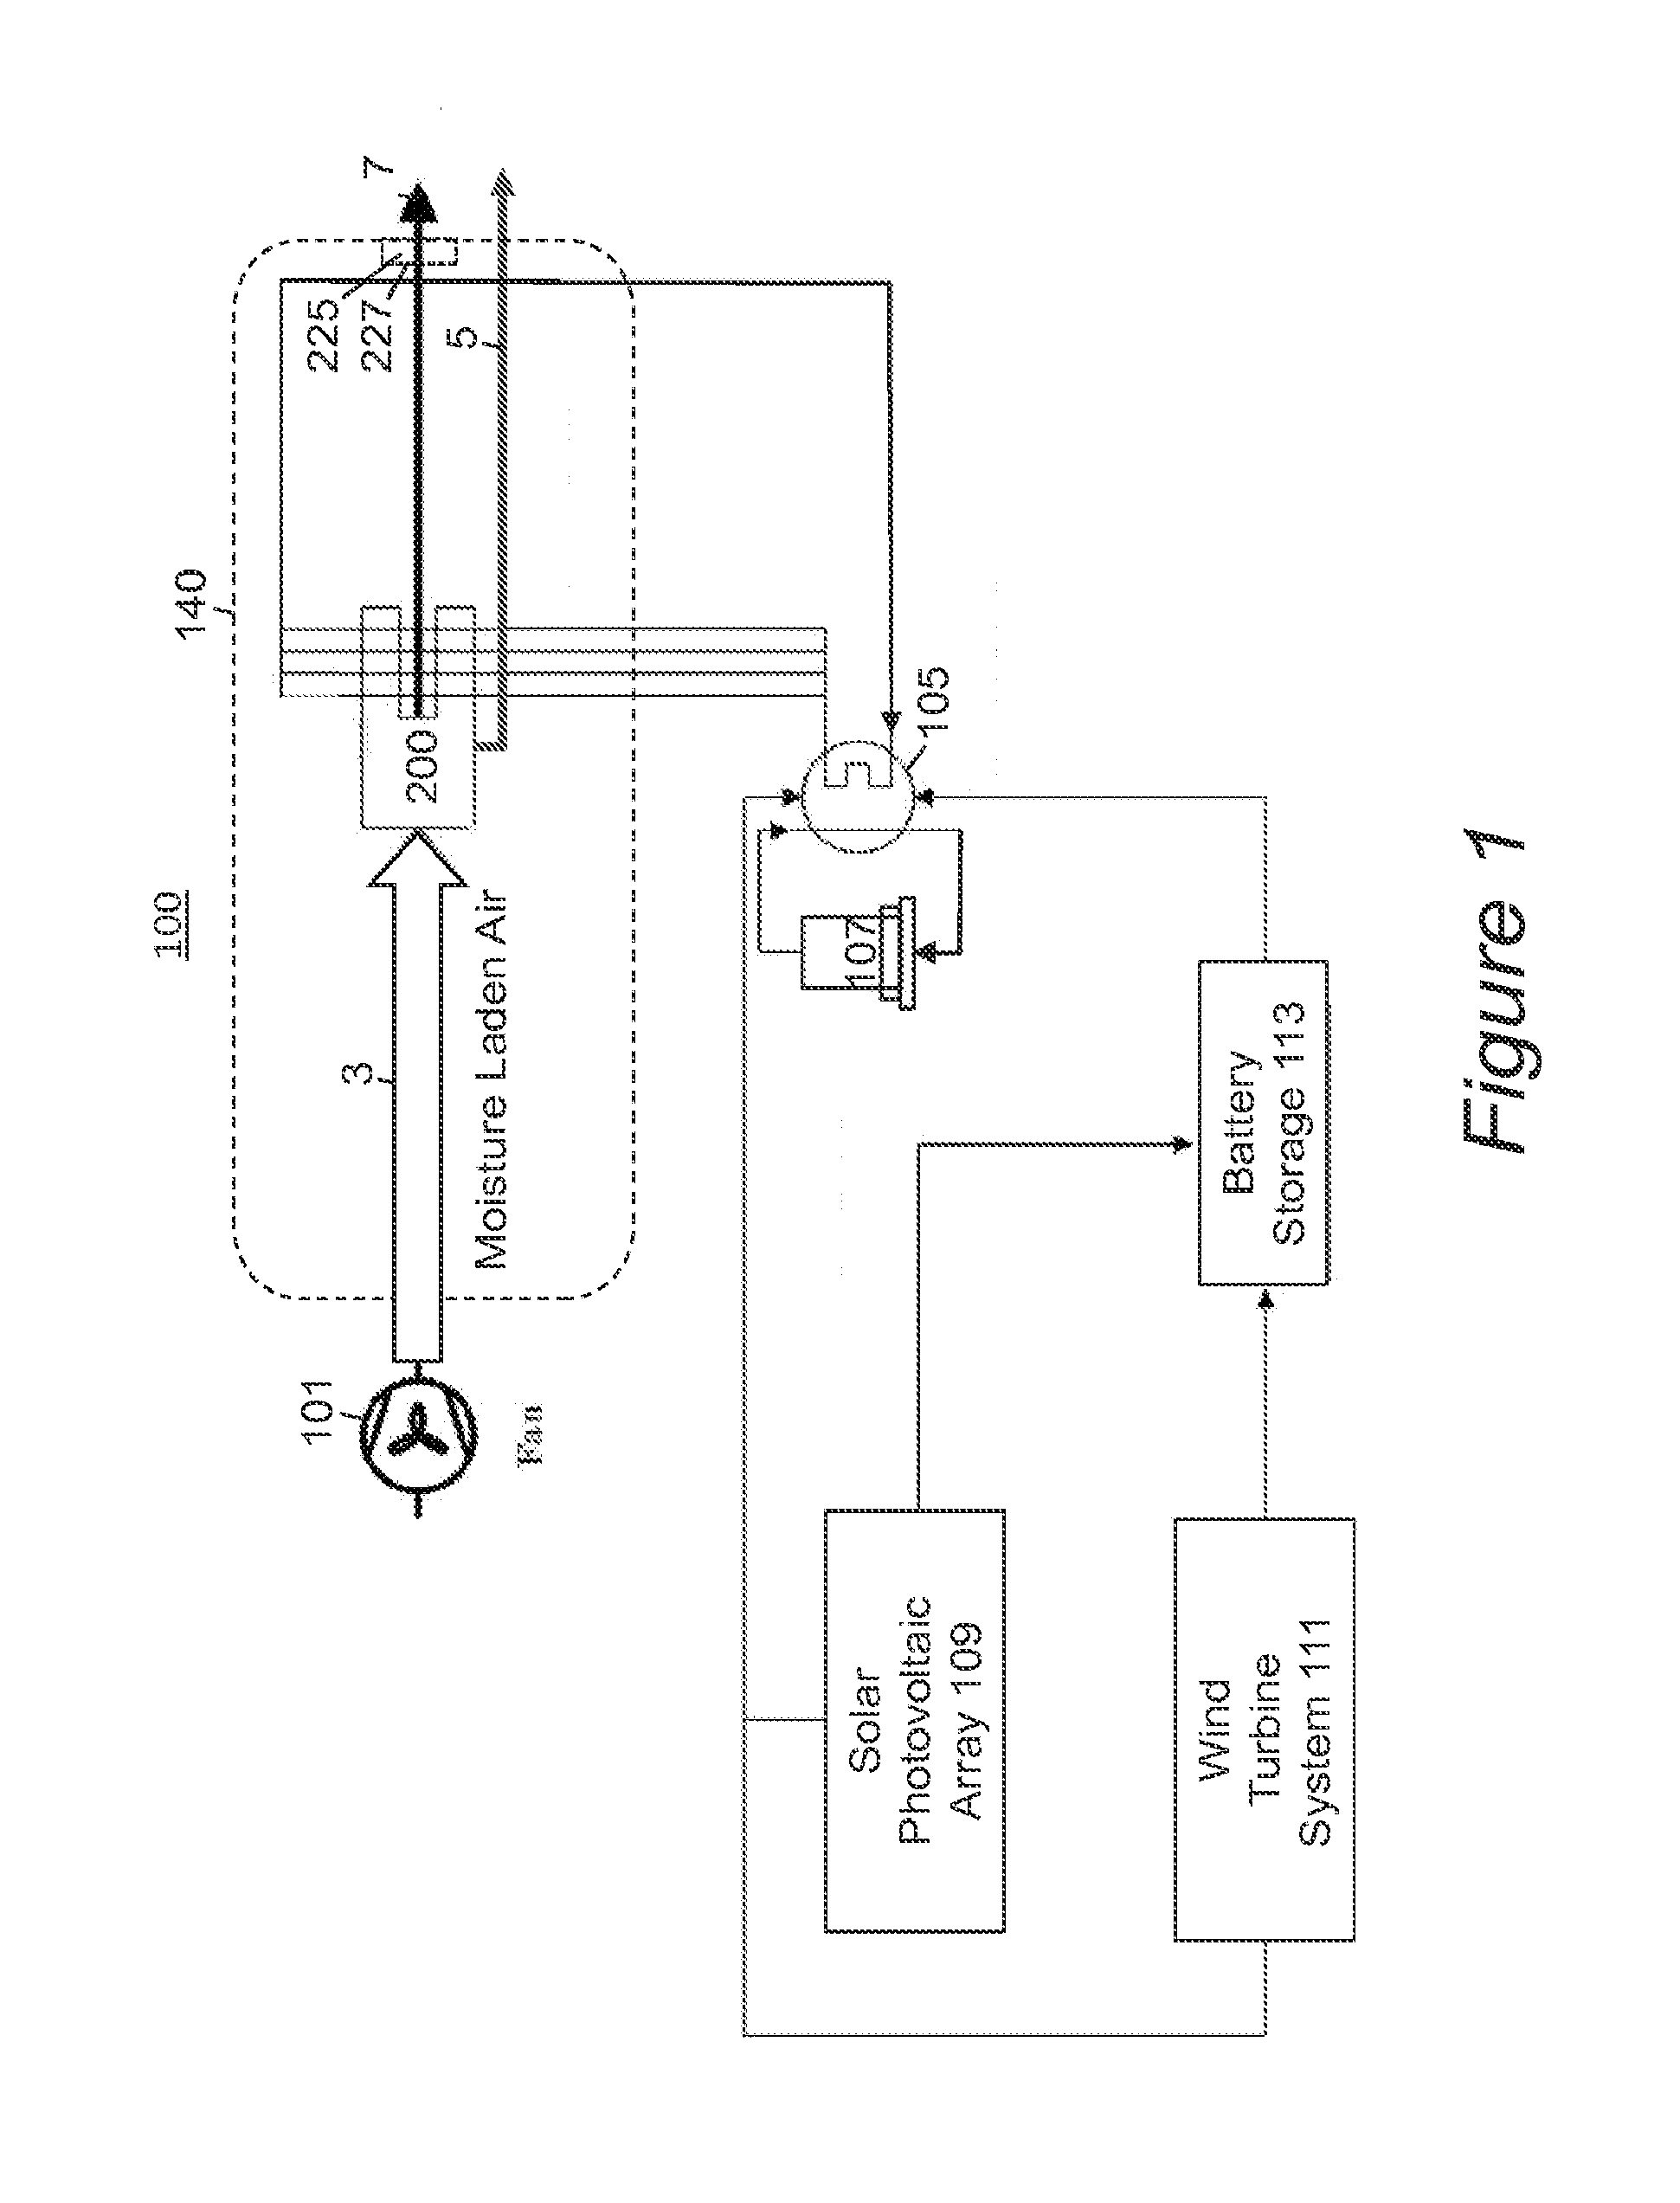 Water harvester and purification system